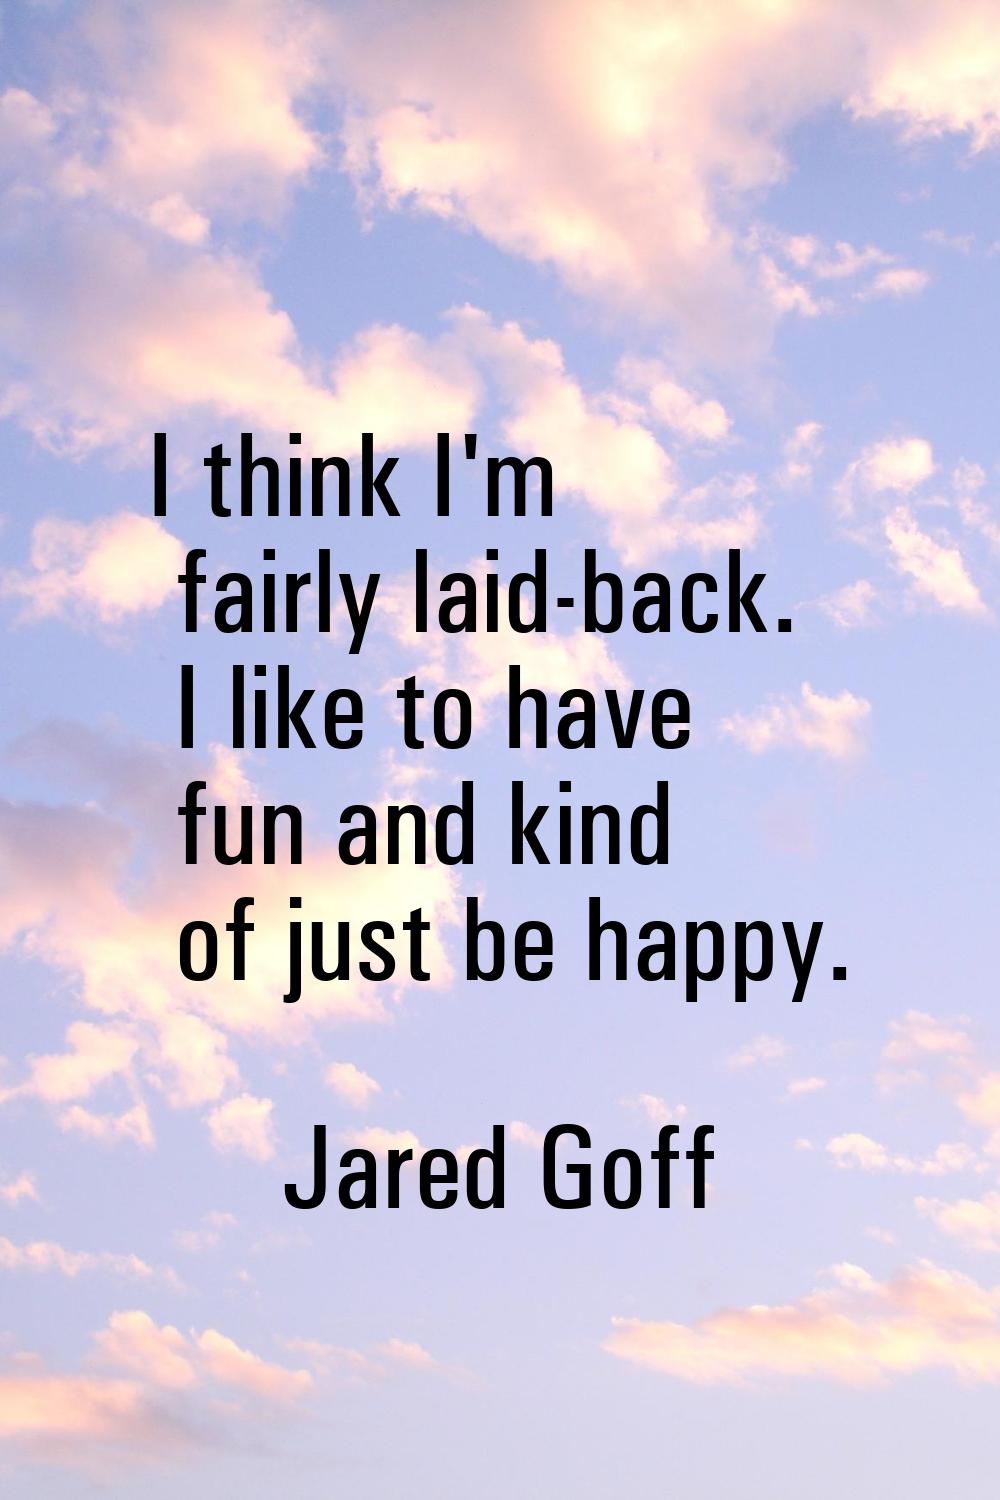 I think I'm fairly laid-back. I like to have fun and kind of just be happy.